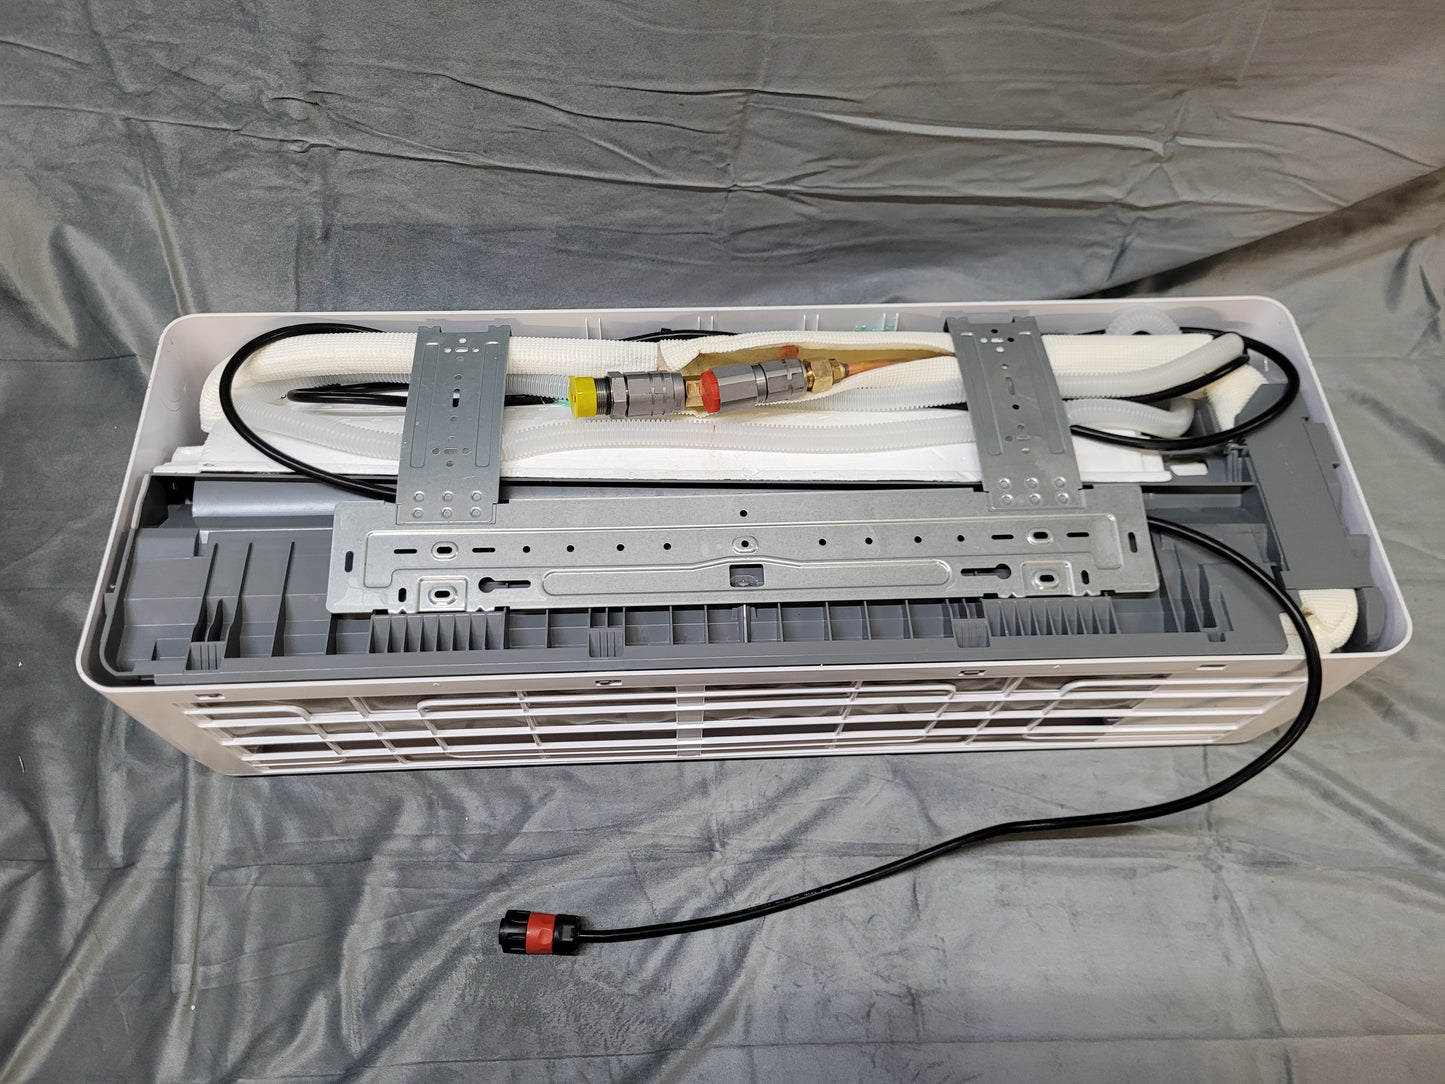 The back of the indoor unit has the quick connectors which attach to the outdoor unit, as well as the pre-installed communications control cord to attach to the outdoor unit.